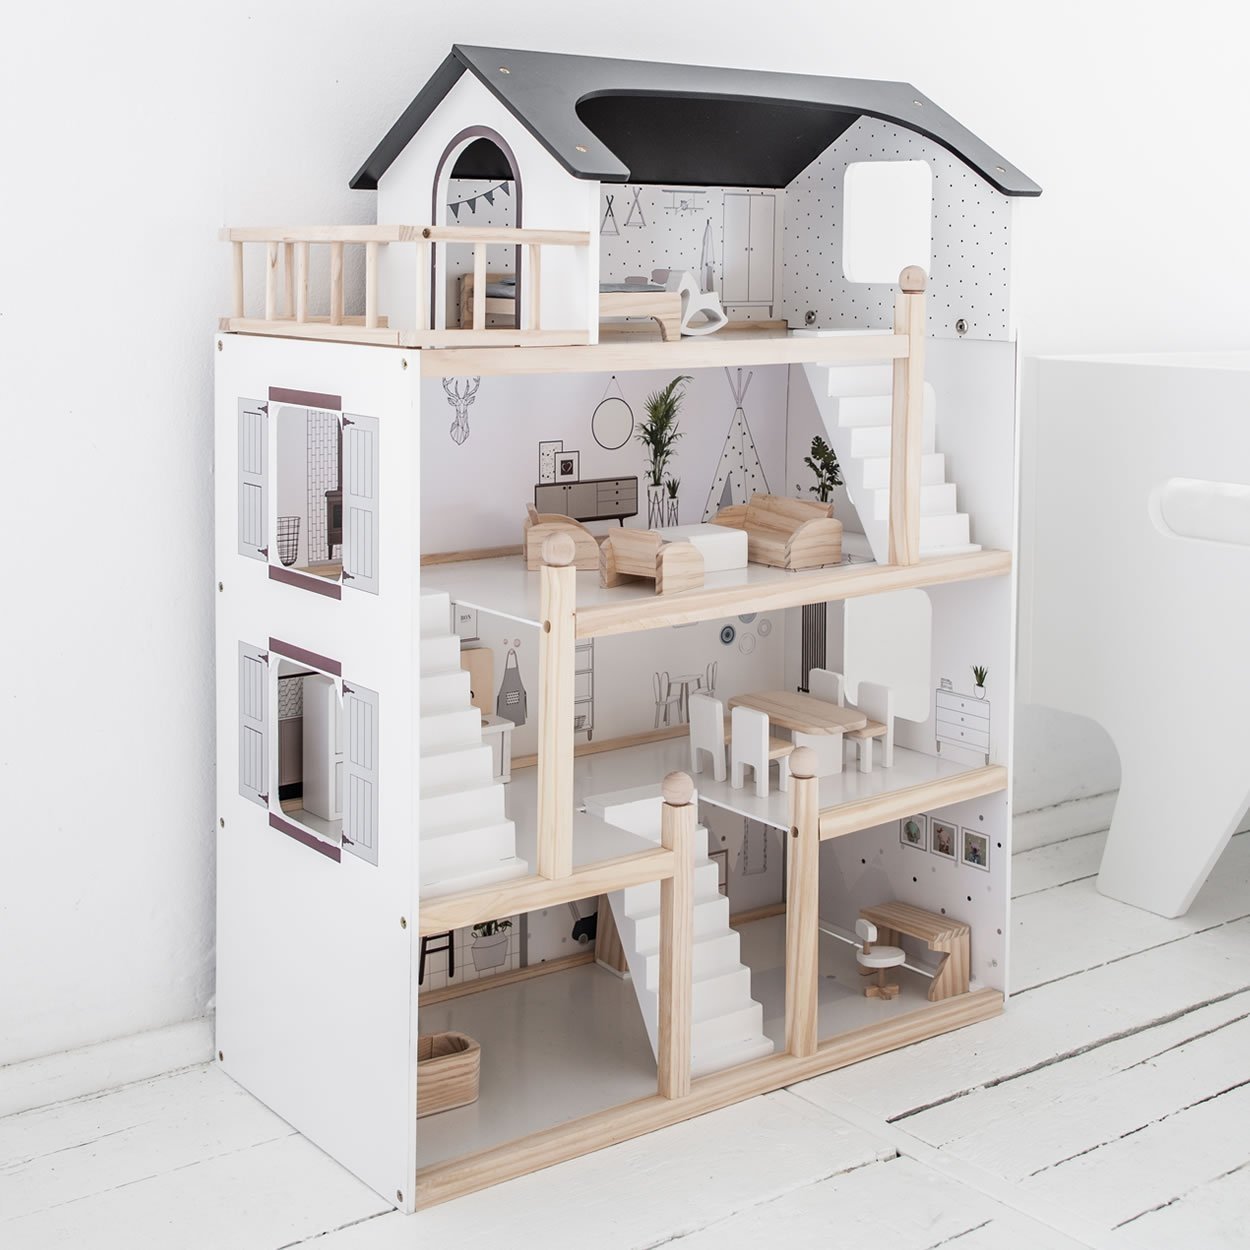 Dolls Houses, Large Wooden Dolls House